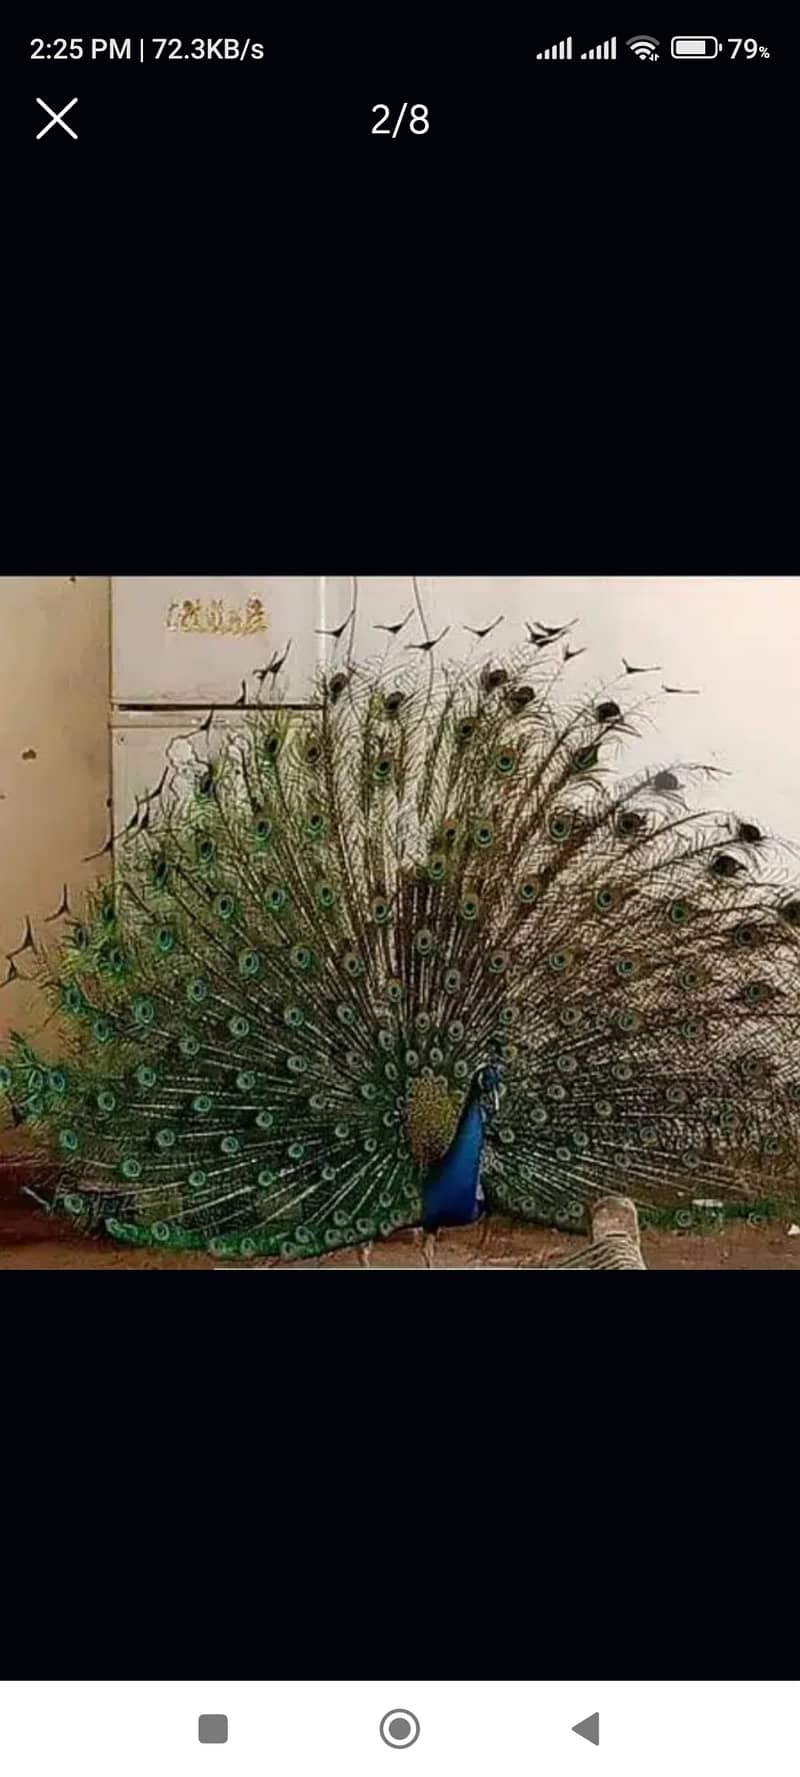 peacocks 1 year 4 years available. cargo possible. contact WhatsApp 1